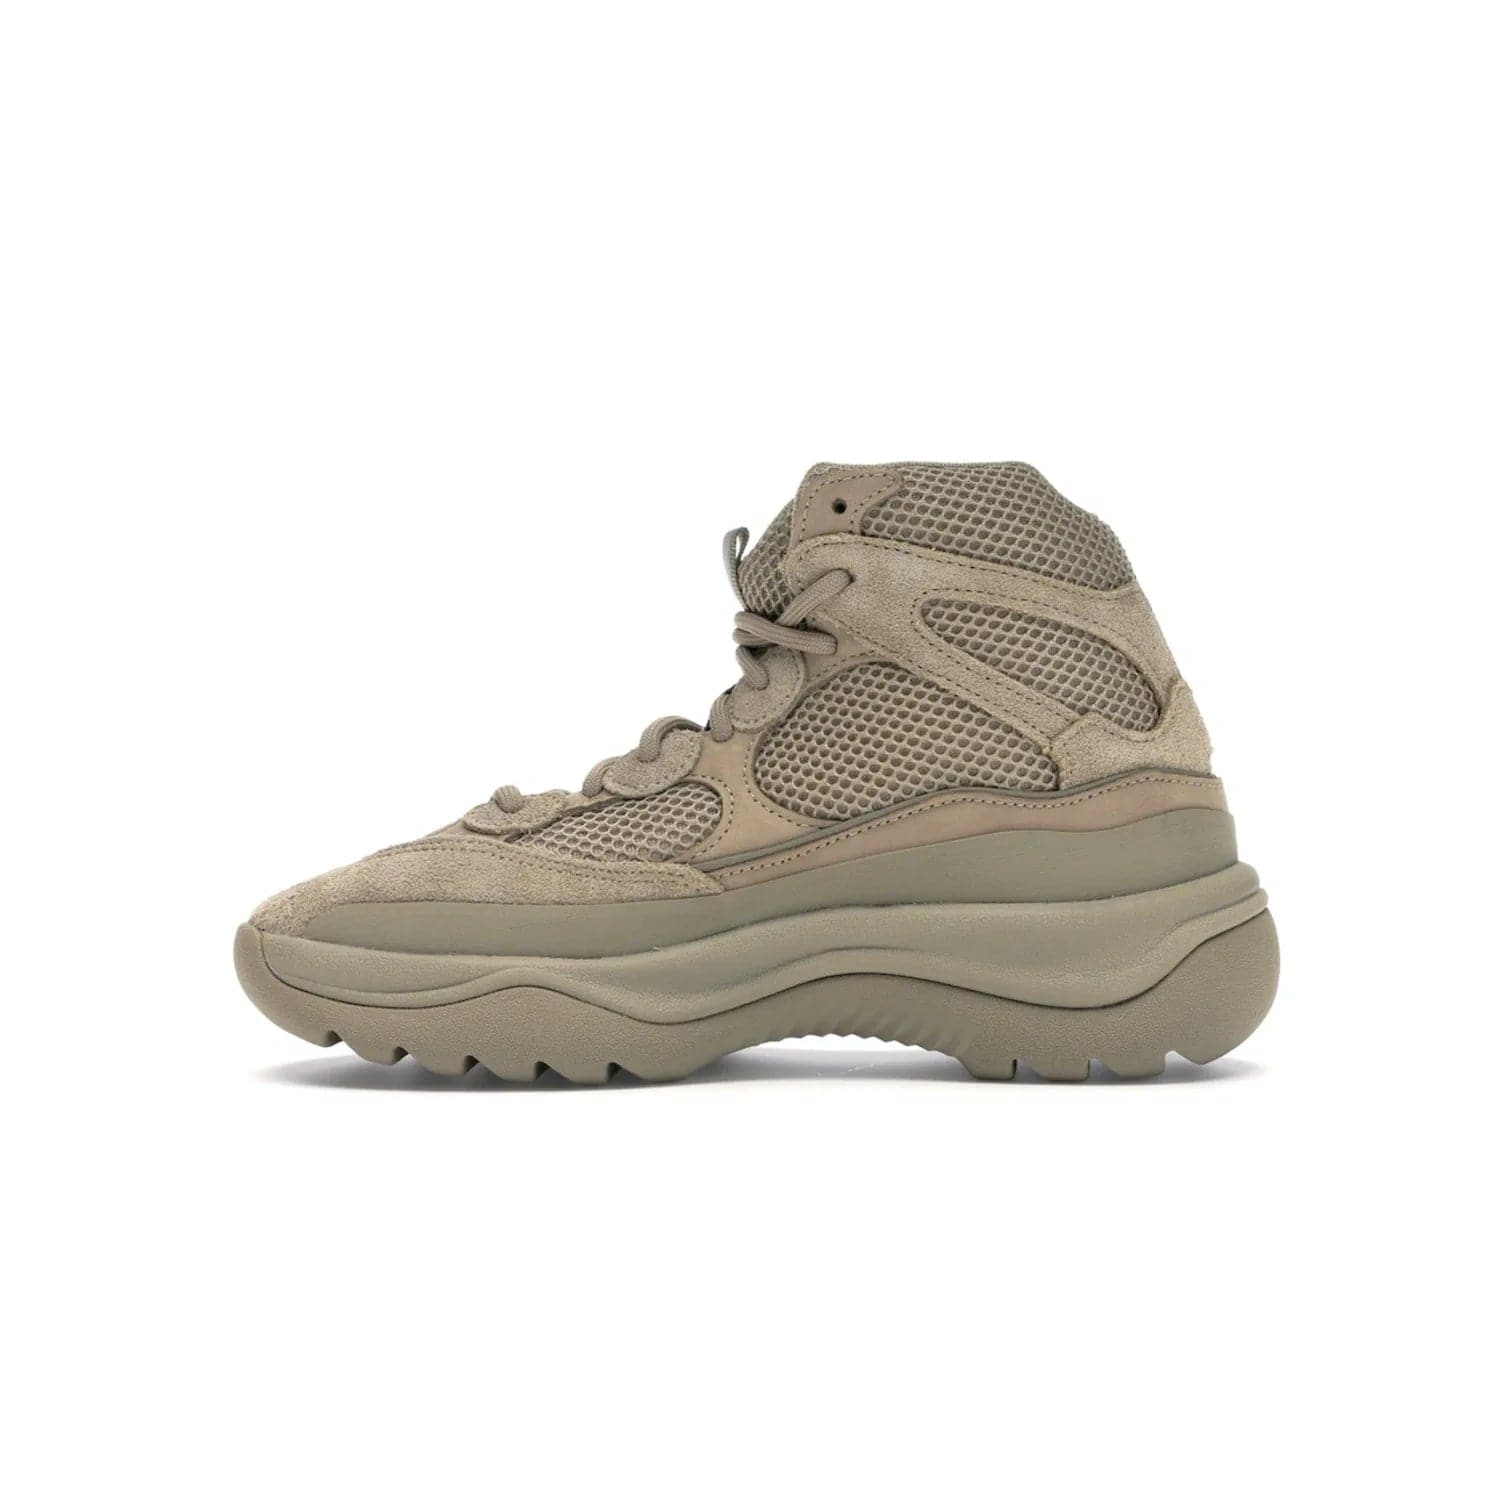 adidas Yeezy Desert Boot Rock - Image 19 - Only at www.BallersClubKickz.com - #
This season, make a fashion statement with the adidas Yeezy Desert Boot Rock. Nubuck and suede upper offers tonal style while the grooved sole provides traction and stability. Get yours in April 2019.